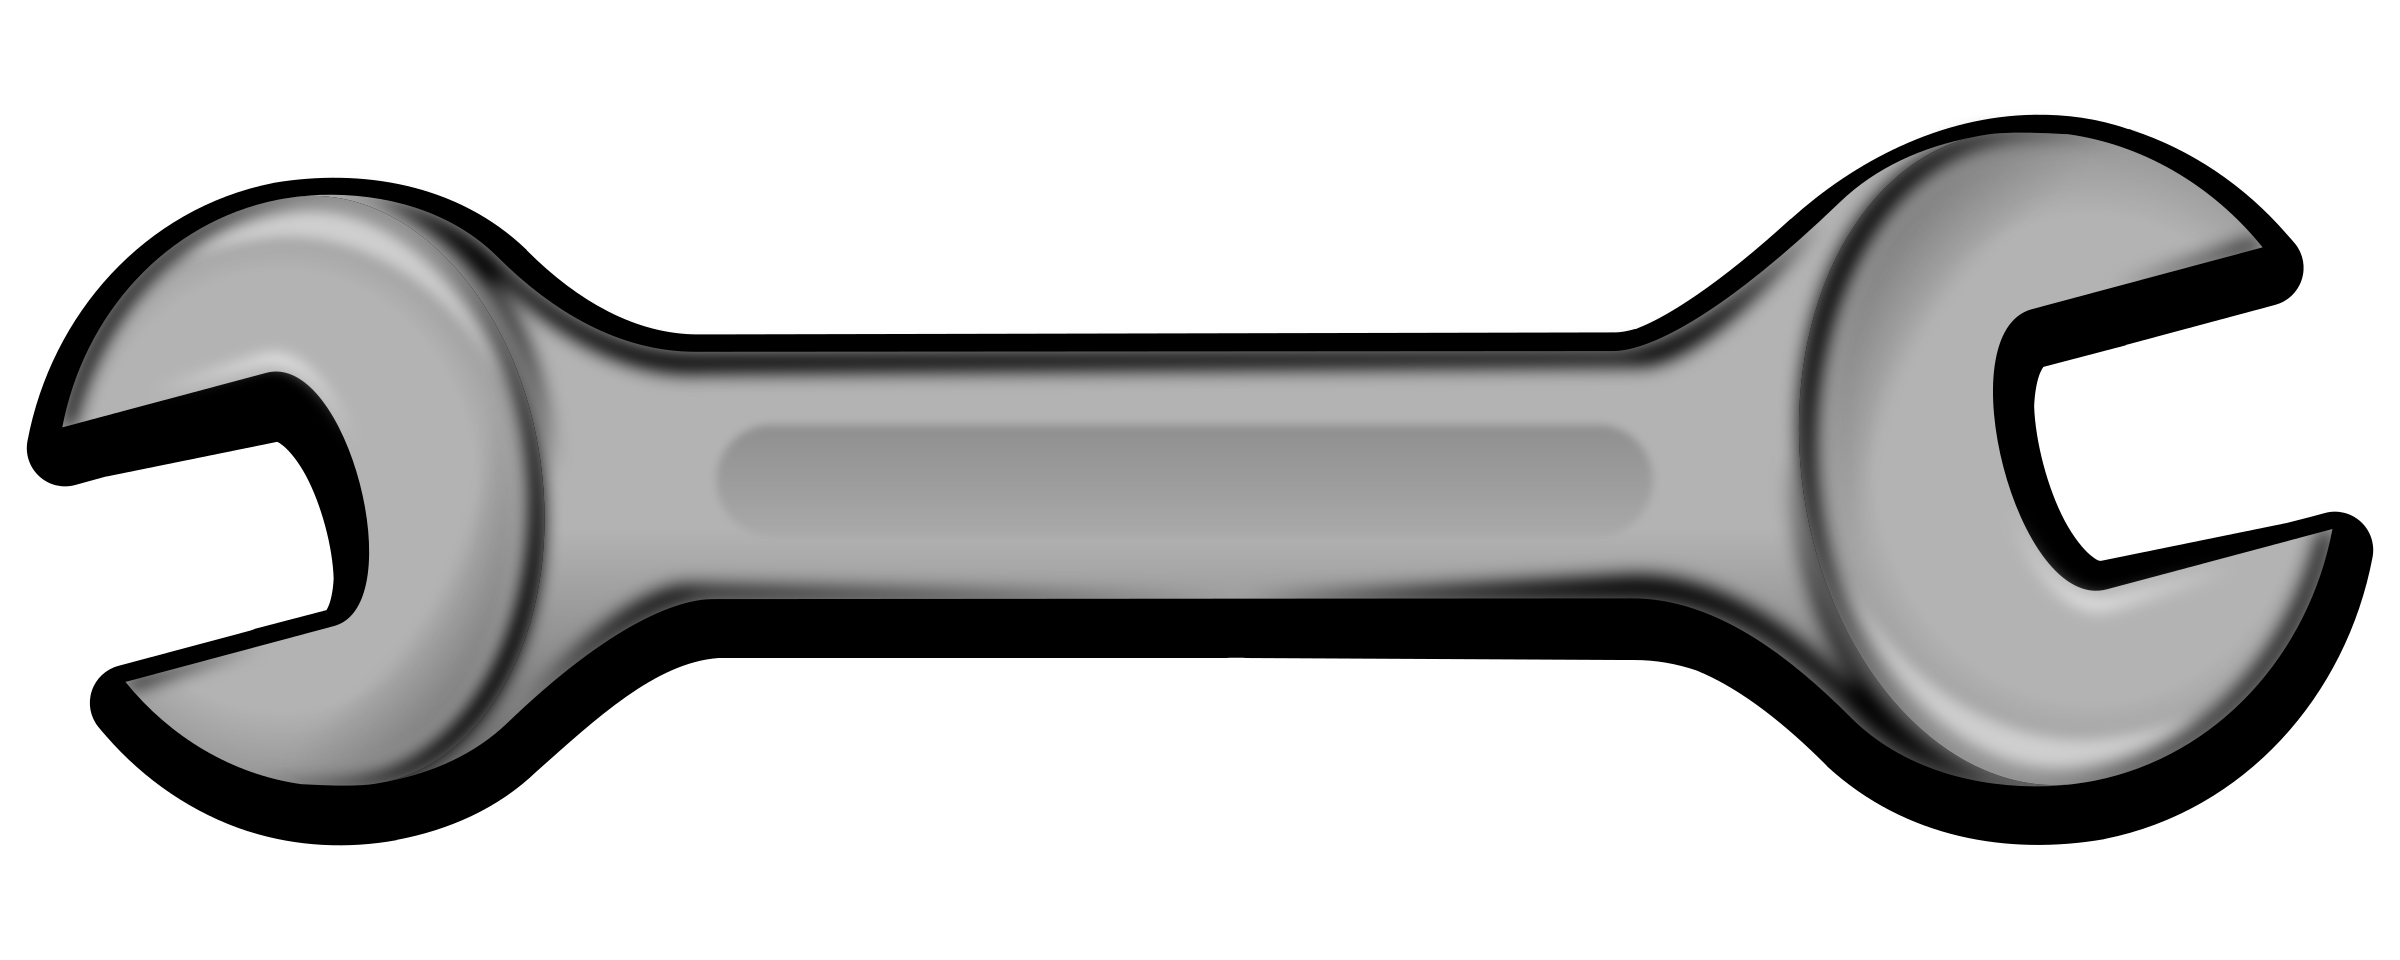 Wrench transparent